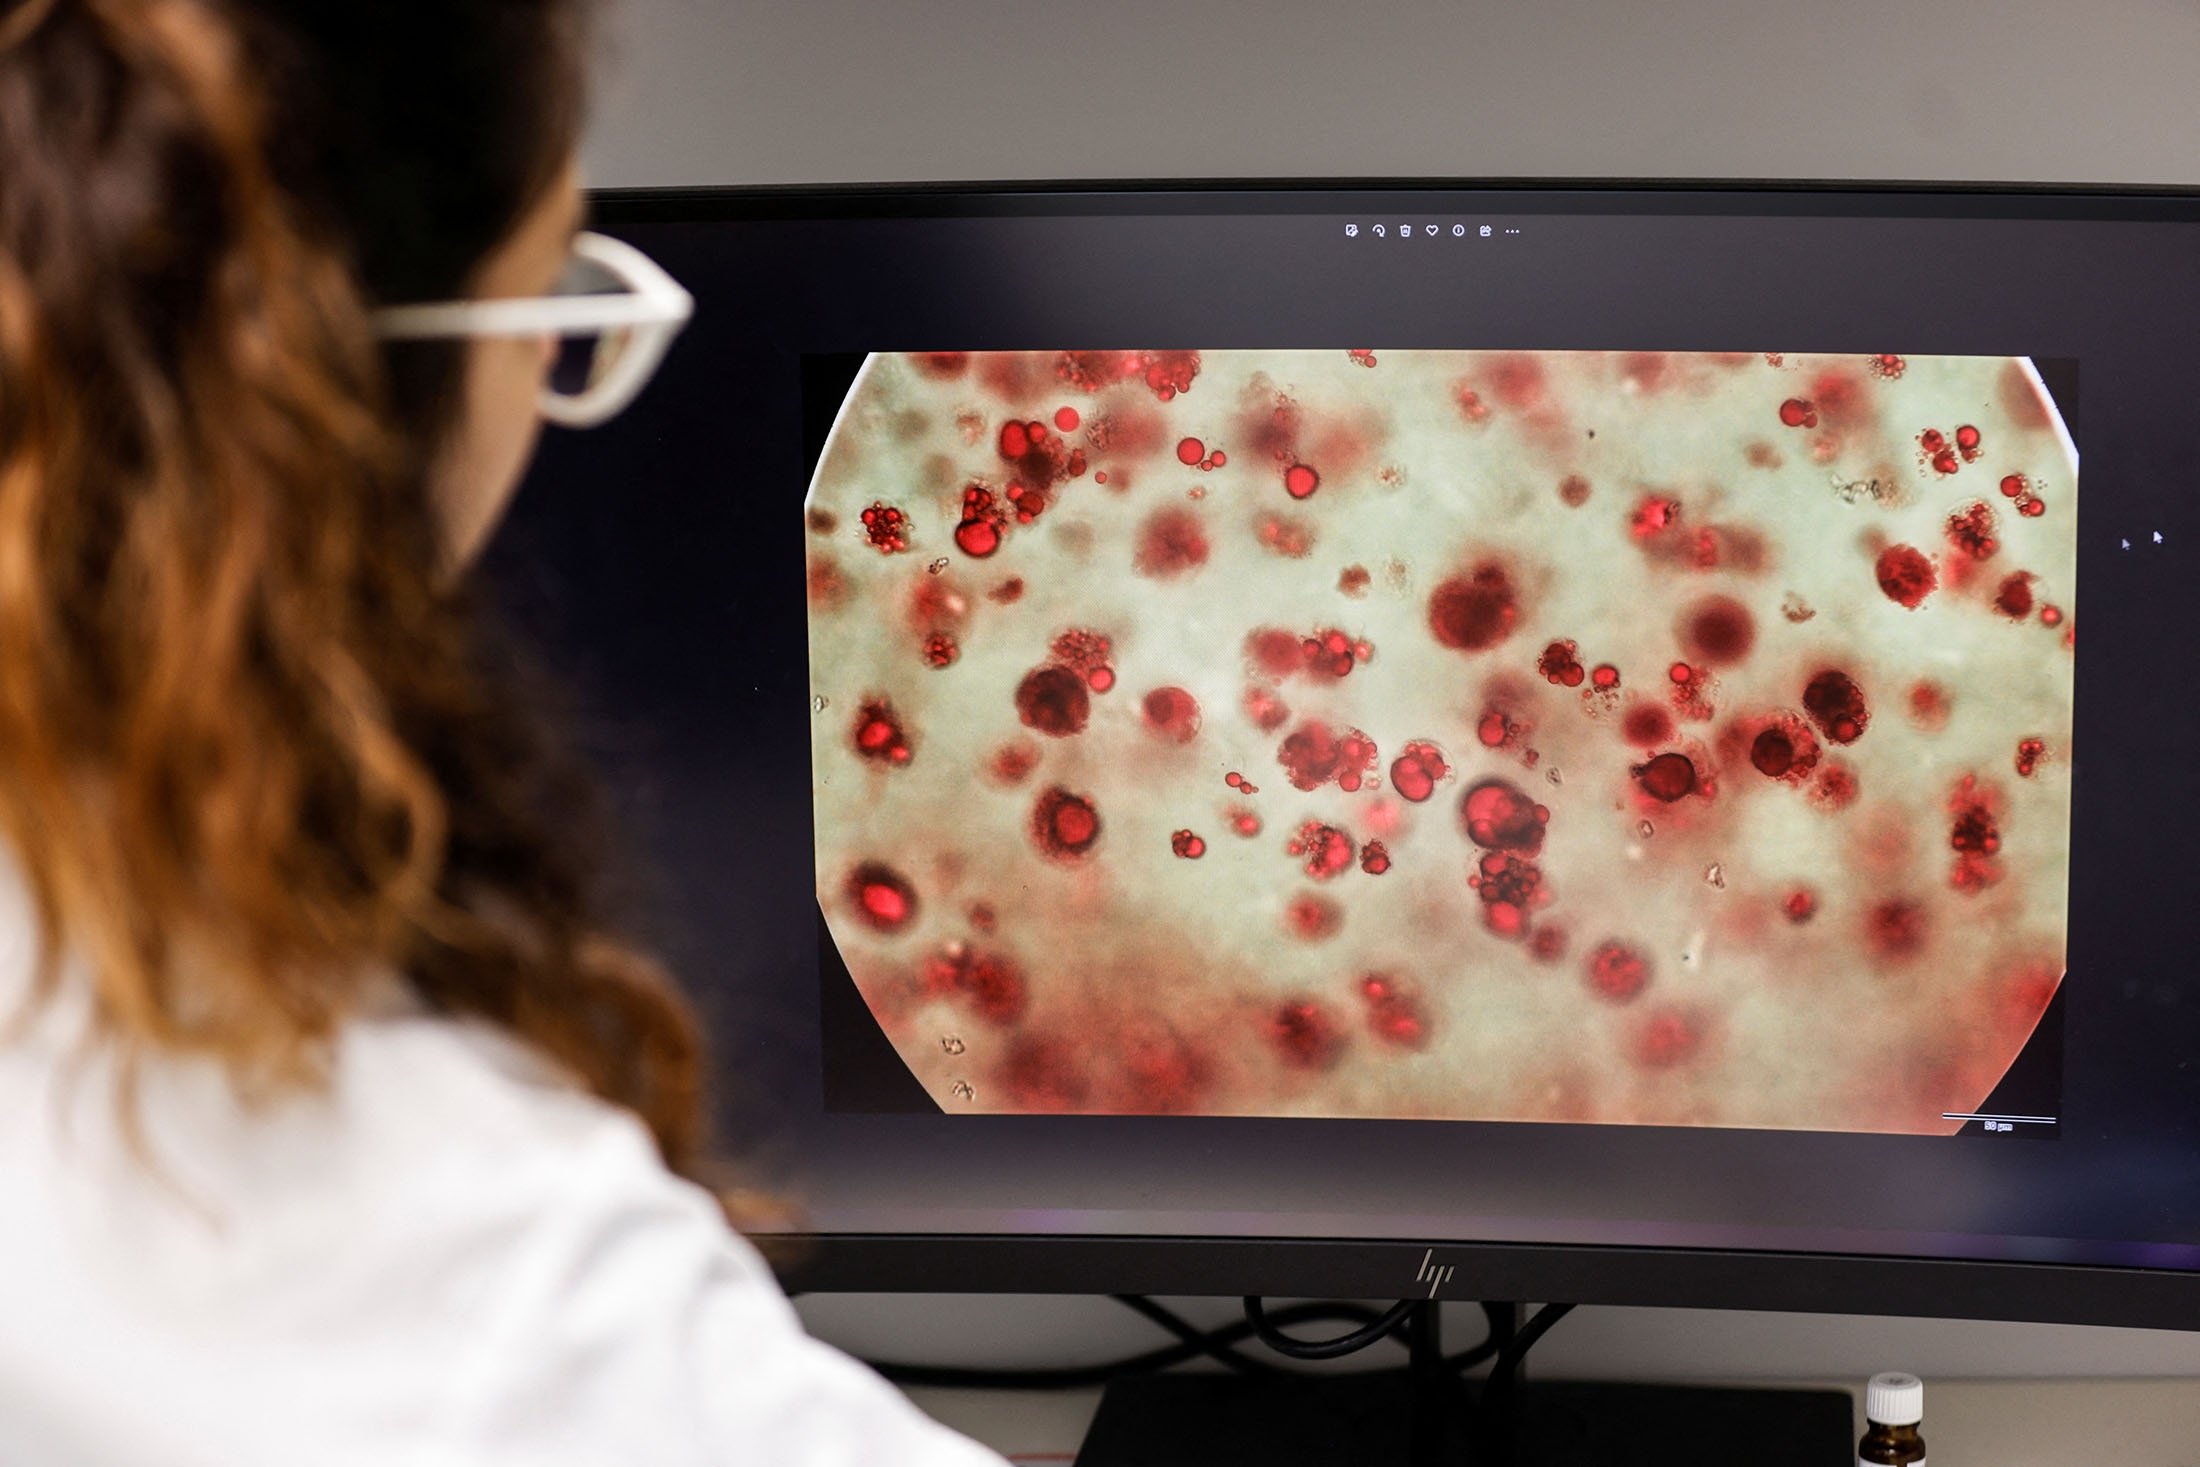 A worker inspects magnified species cells on a screen at the offices of Steakholder Foods in Rehovot, Israel, April 23, 2023. (Reuters Photo)